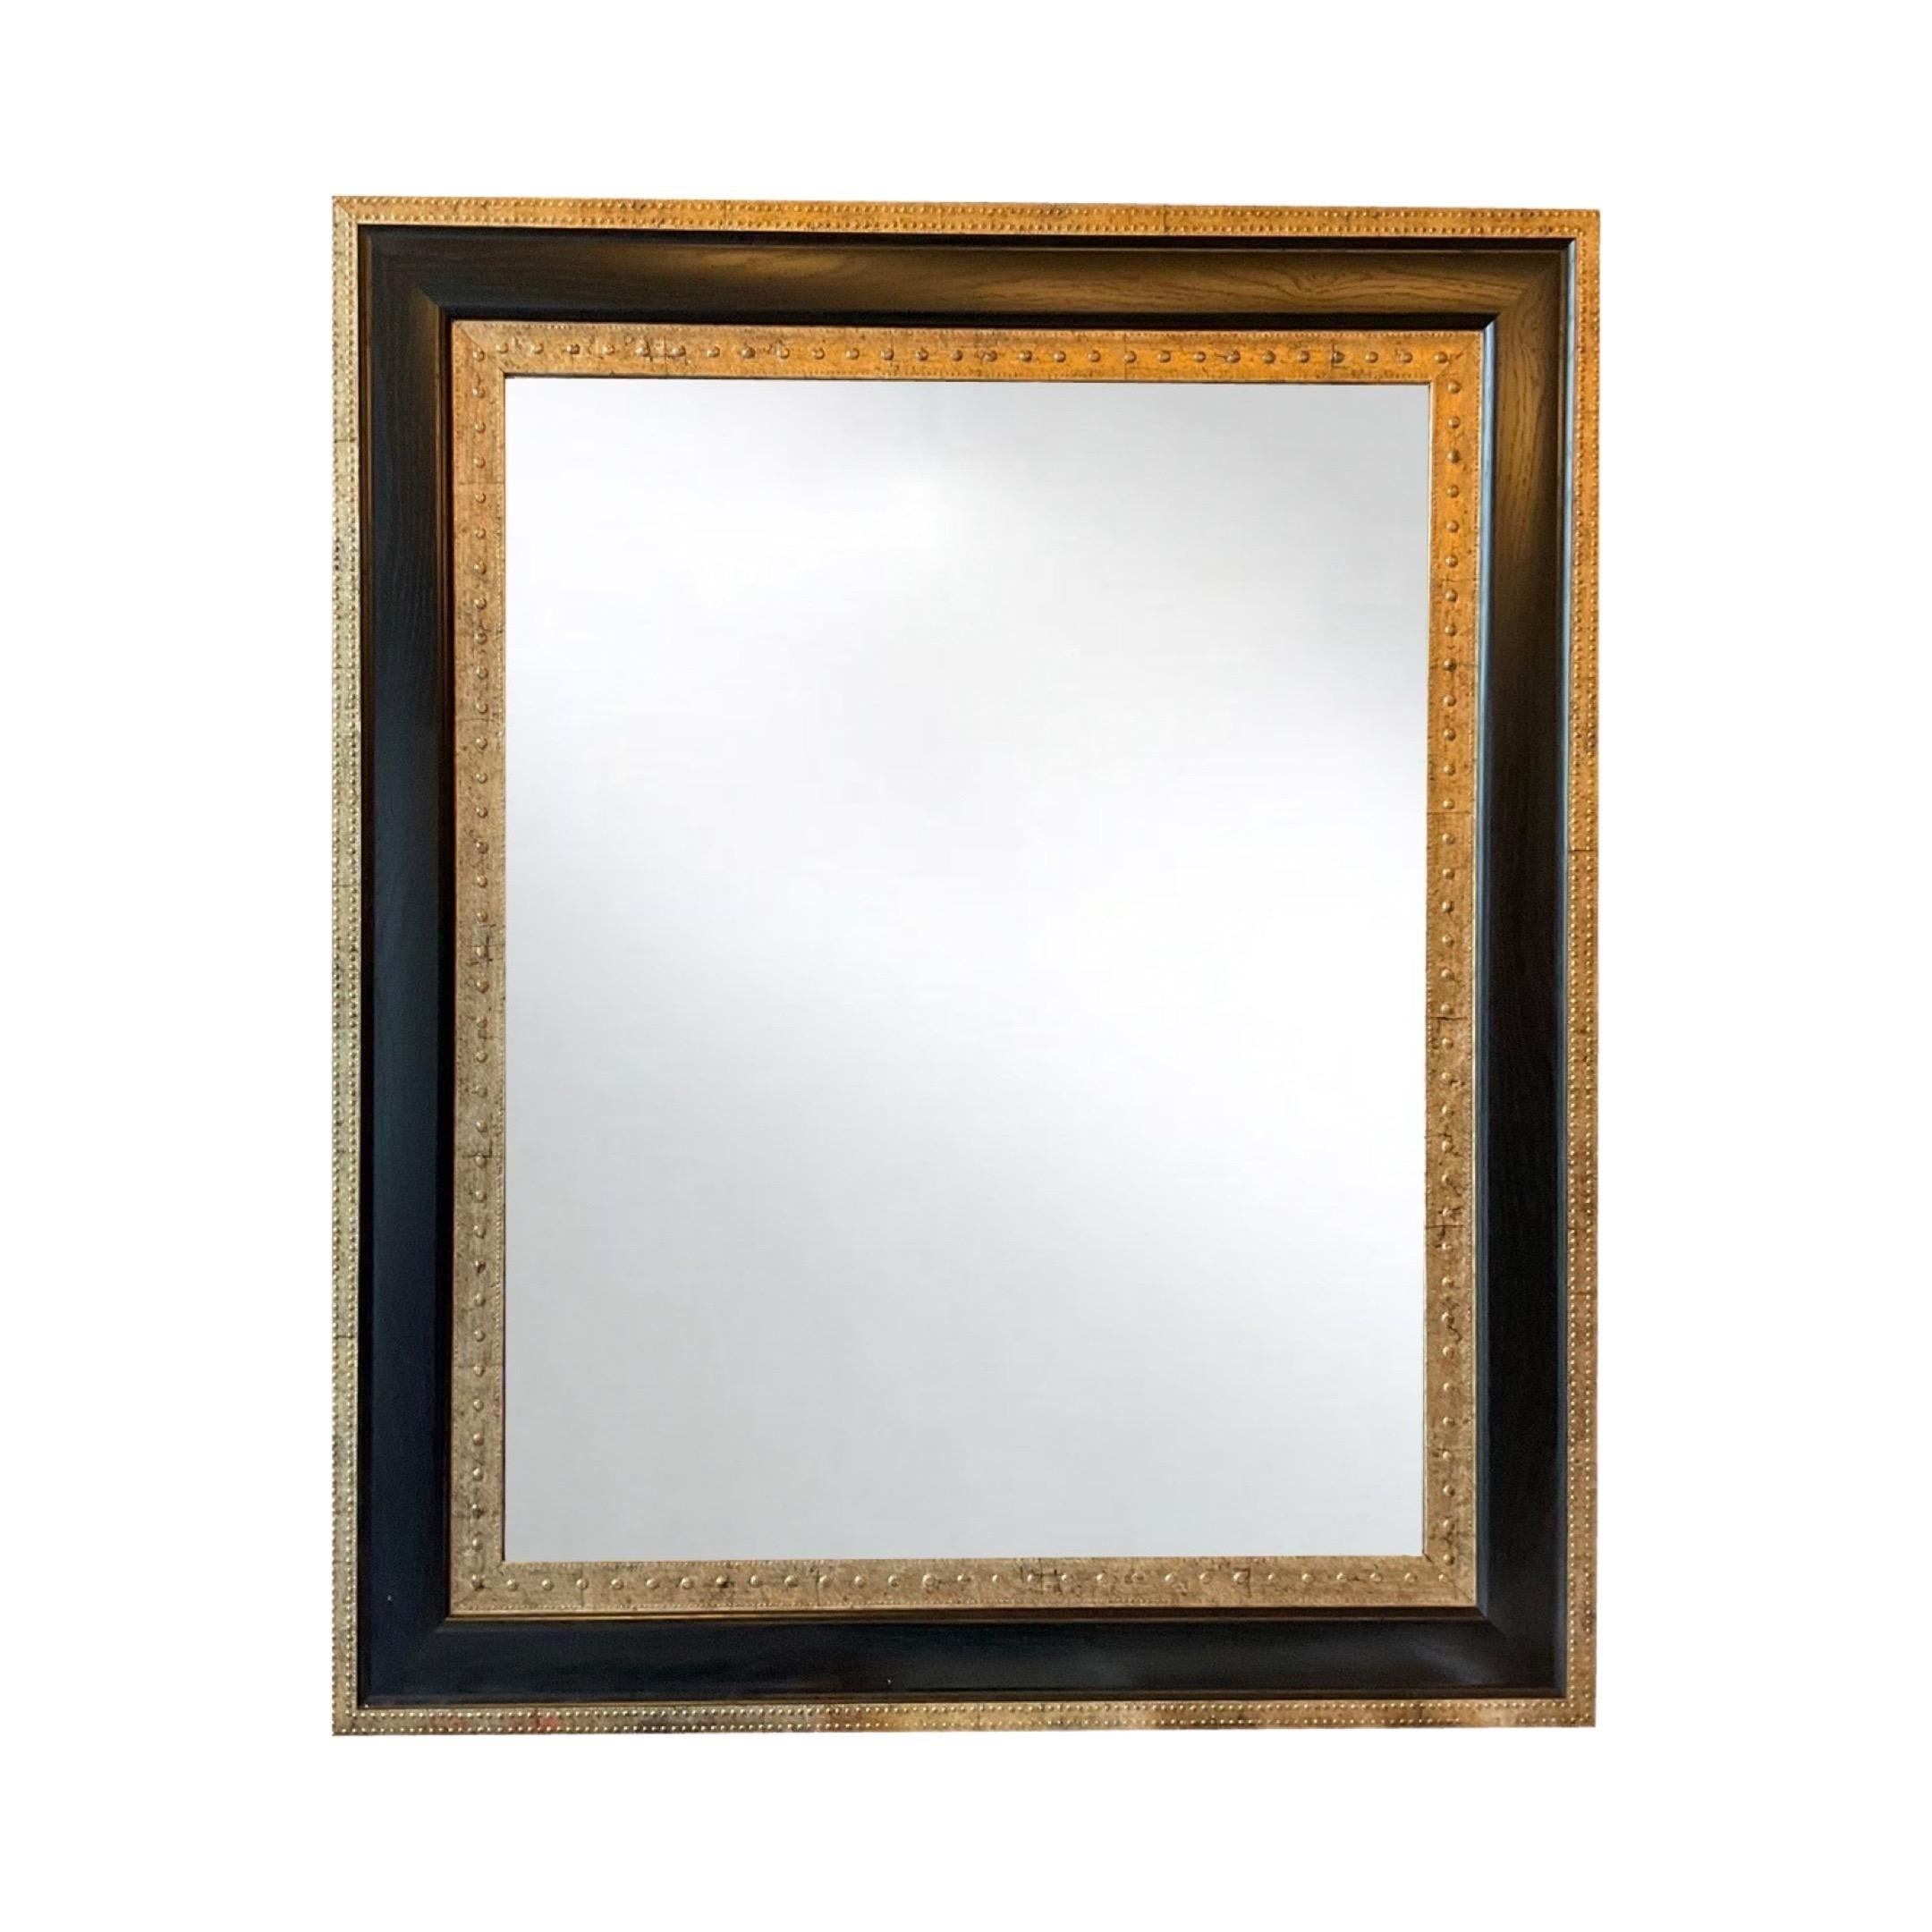 Crafted in the 1940s, this French Ebony Wood Mirror exudes elegance and sophistication. Made of rich ebony wood with a stunning gold leaf finish, it adds a touch of luxury to any space. Enjoy the timeless beauty and quality craftsmanship of this